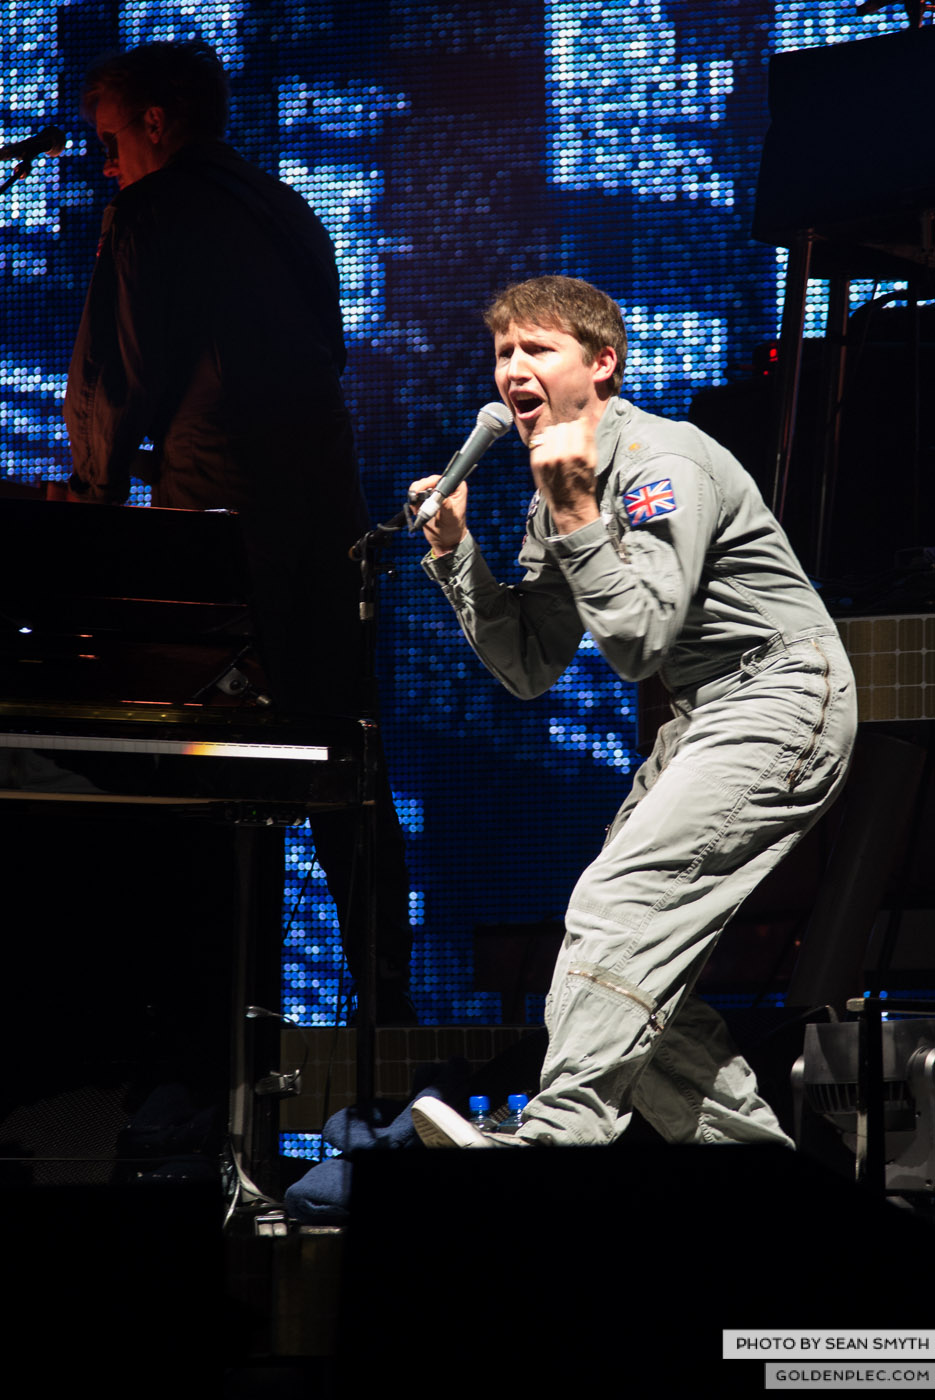 james-blunt-at-3arena-by-sean-smyth-20-11-14-13-of-29